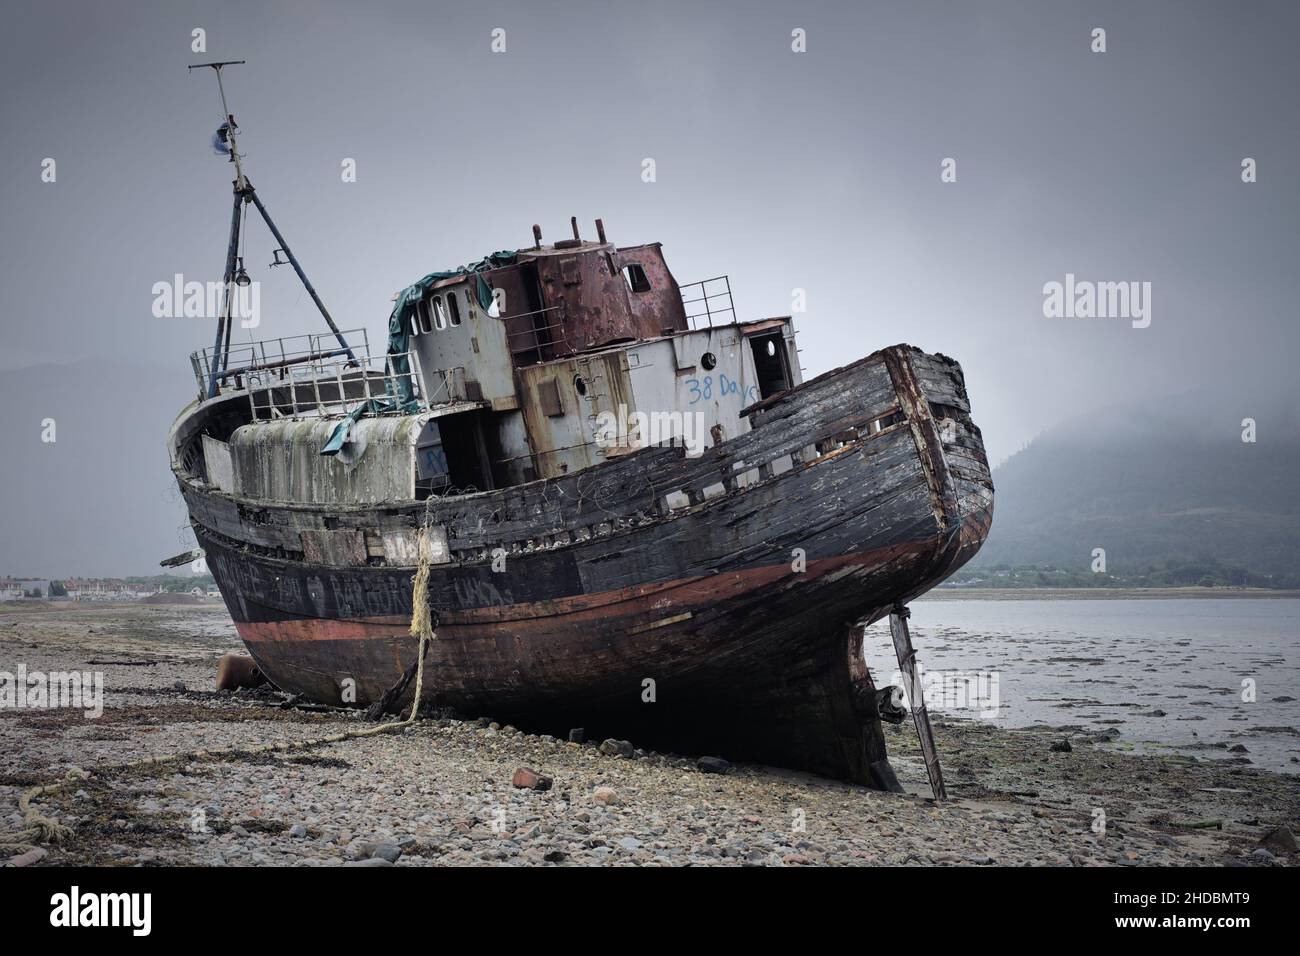 An appropriate place for a shipwreck, well, grounded and mostly abandoned former fishing trawler boat: Corpach takes its name from the Gaelic ('bodily Stock Photo